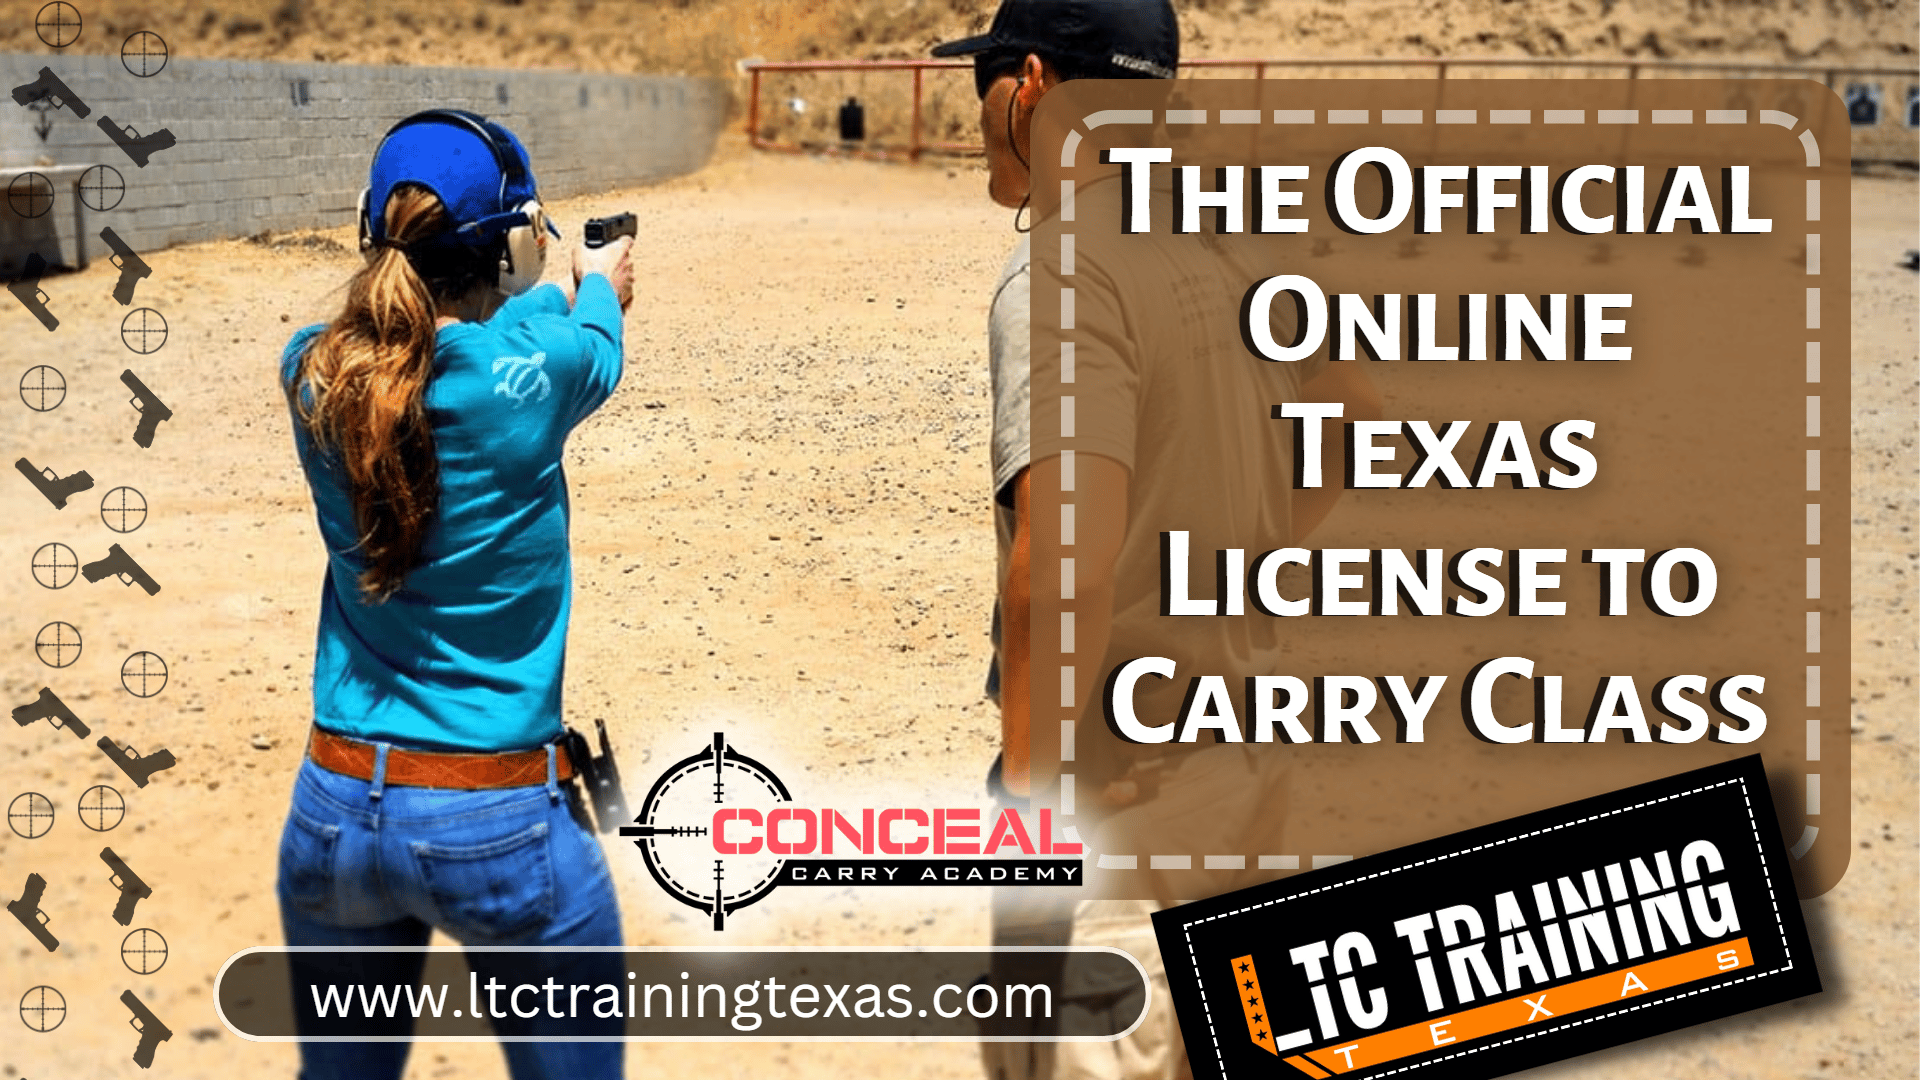 You are currently viewing The Official Online Texas License to Carry Class